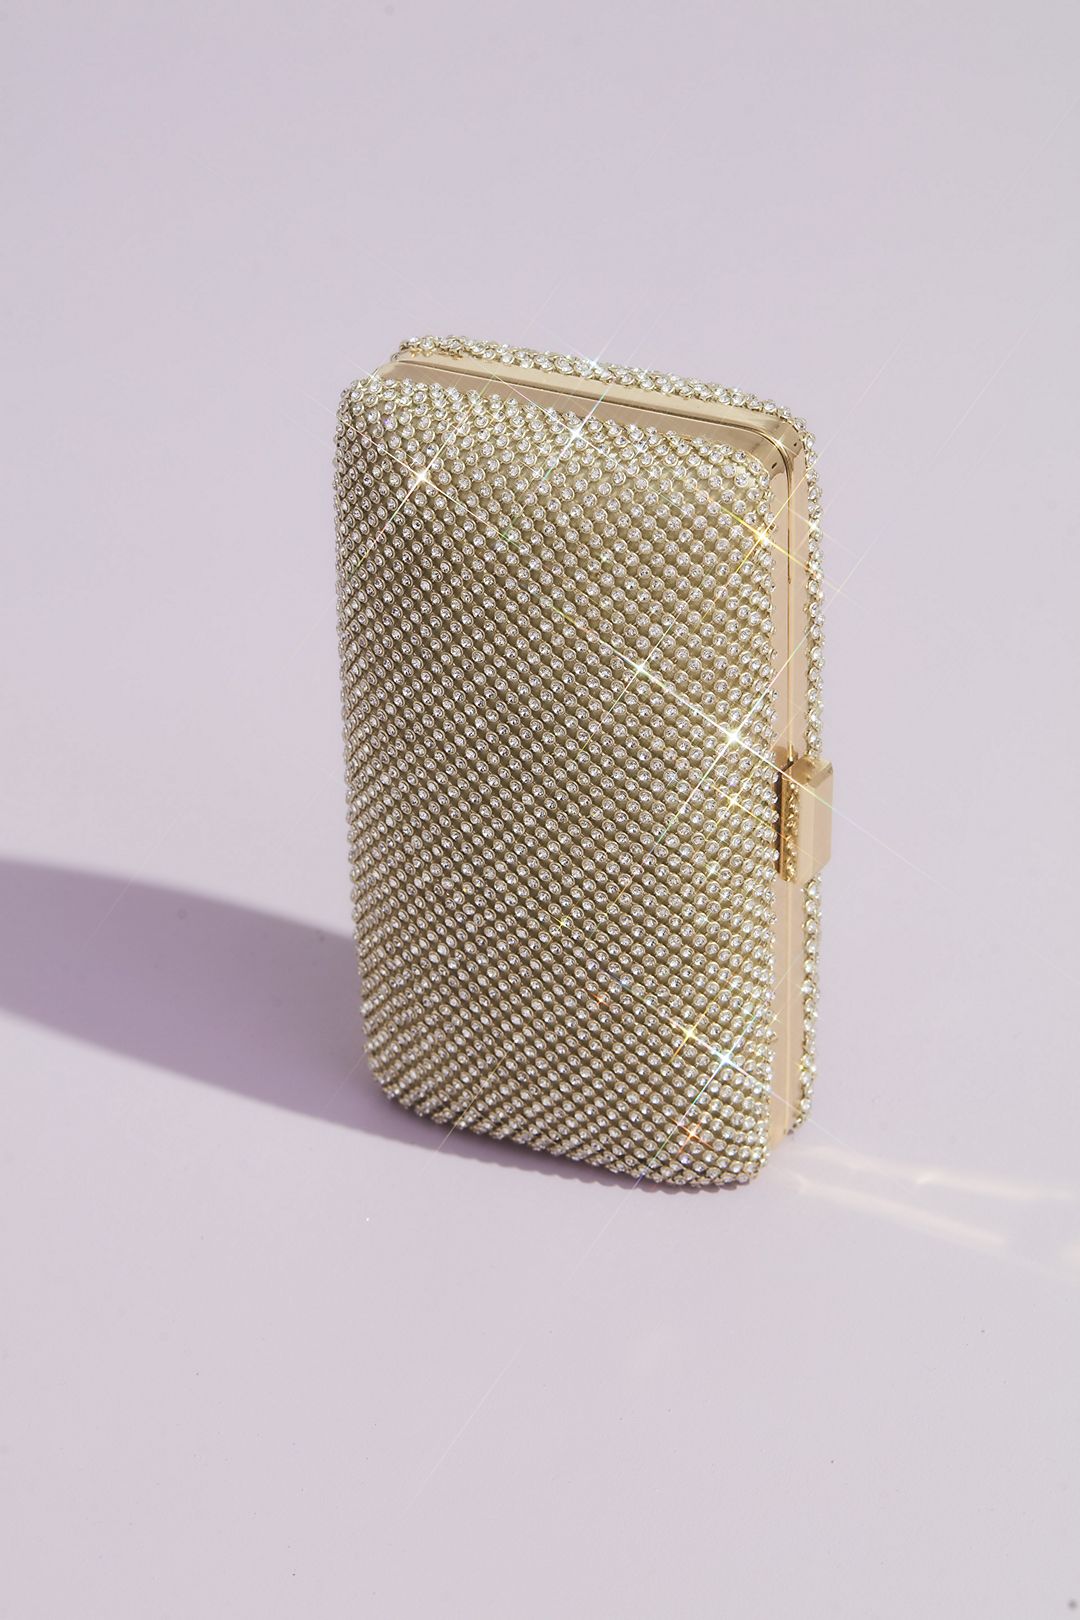 Crystal Minaudiere Evening Clutch with Chain Strap Image 2